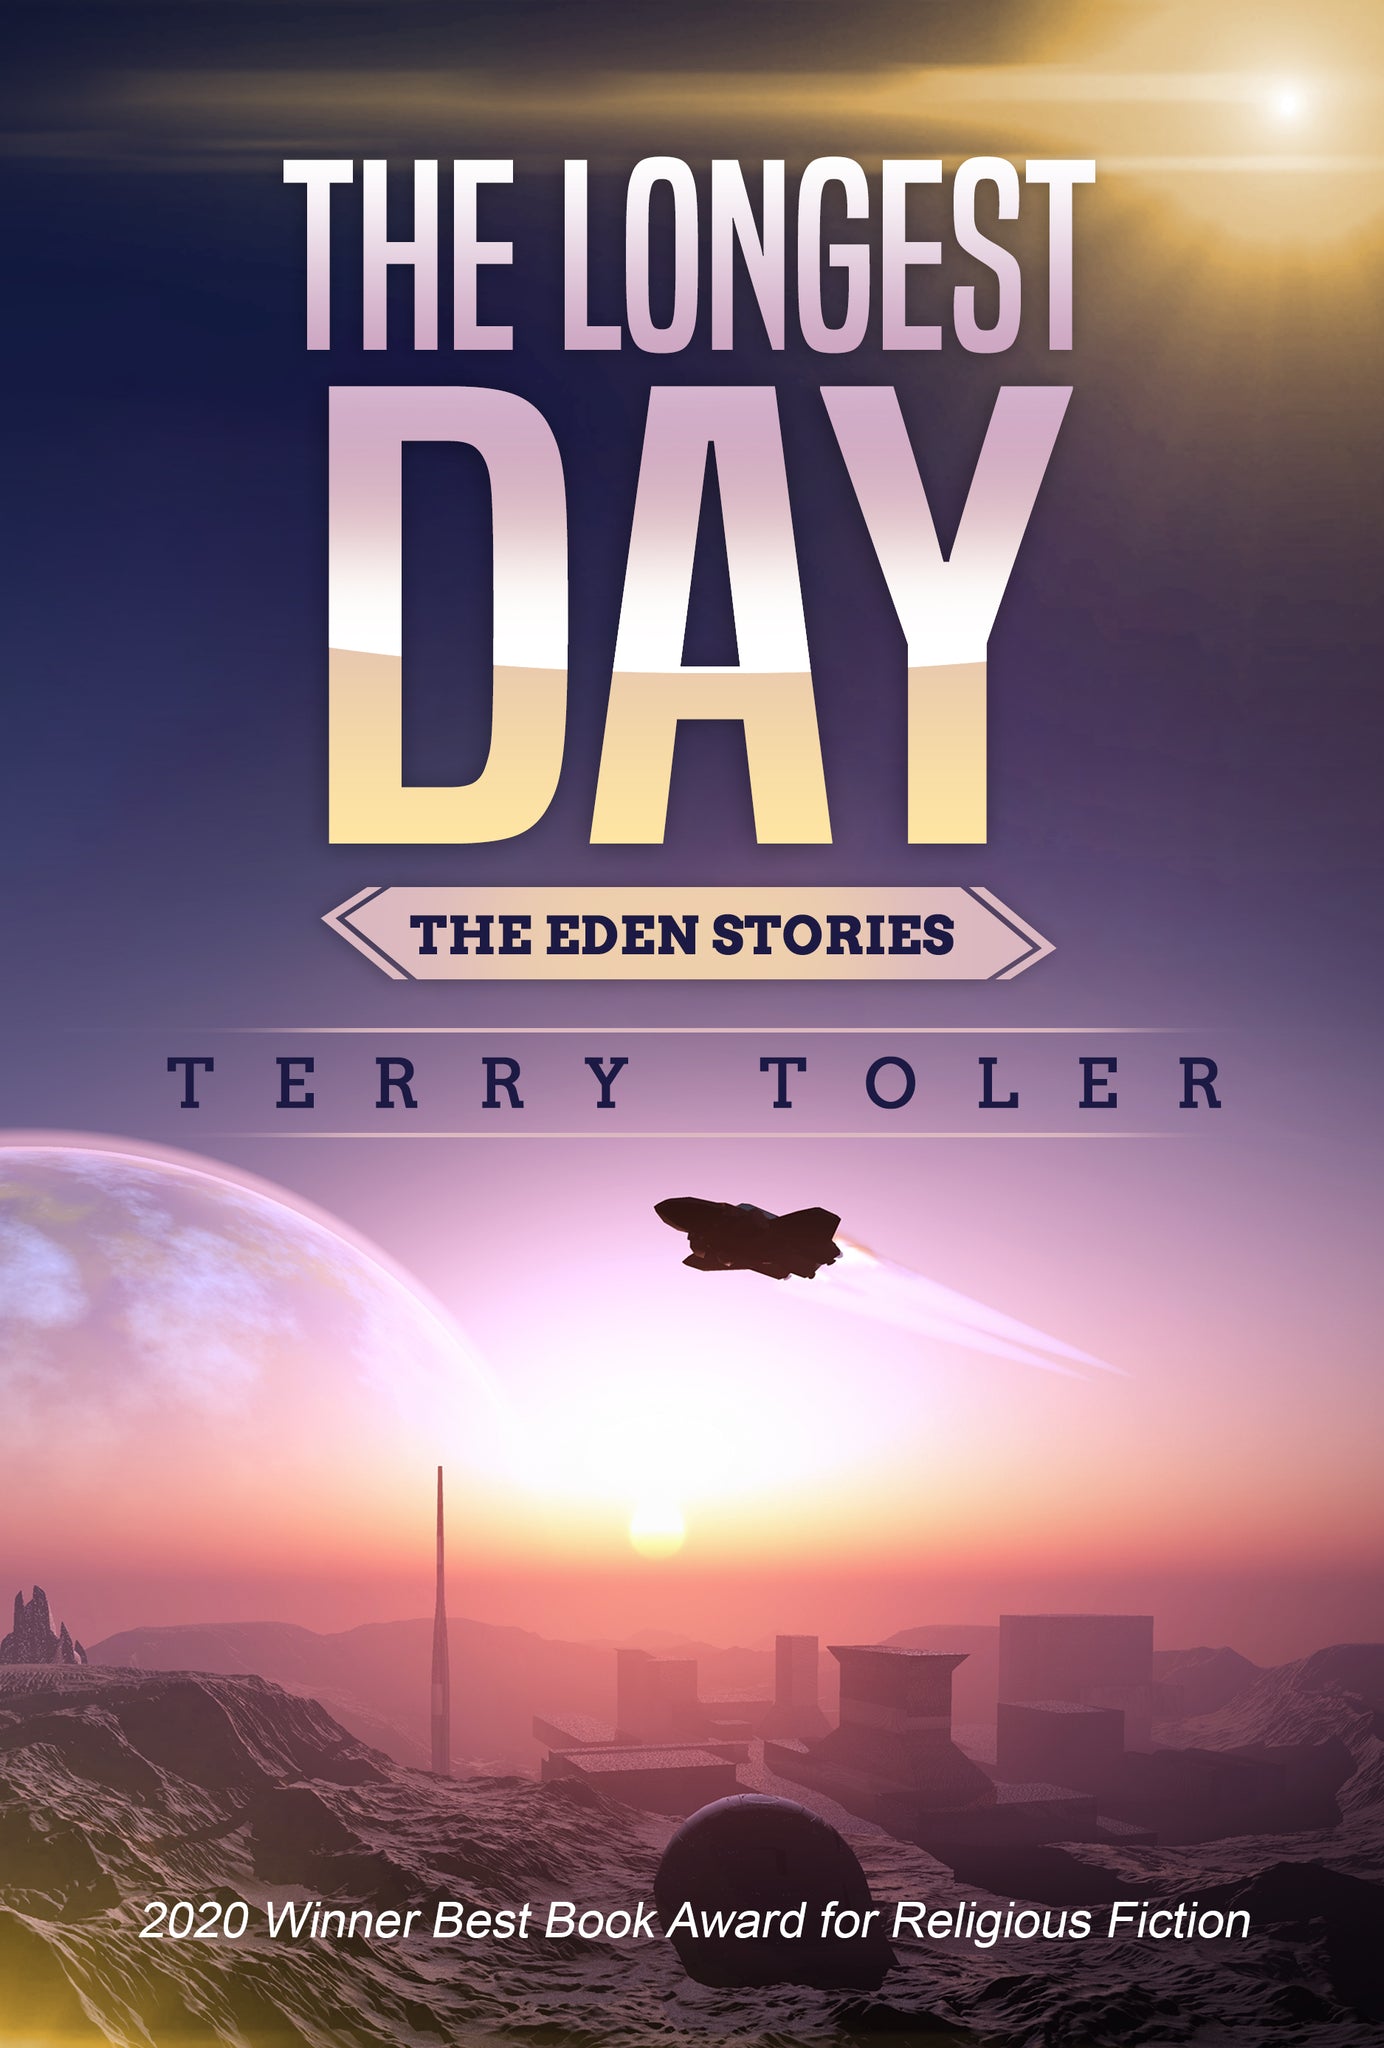 THE LONGEST DAY WINNER 2020 BEST RELIGIOUS FICTION BOOK OF THE YEAR AWARD